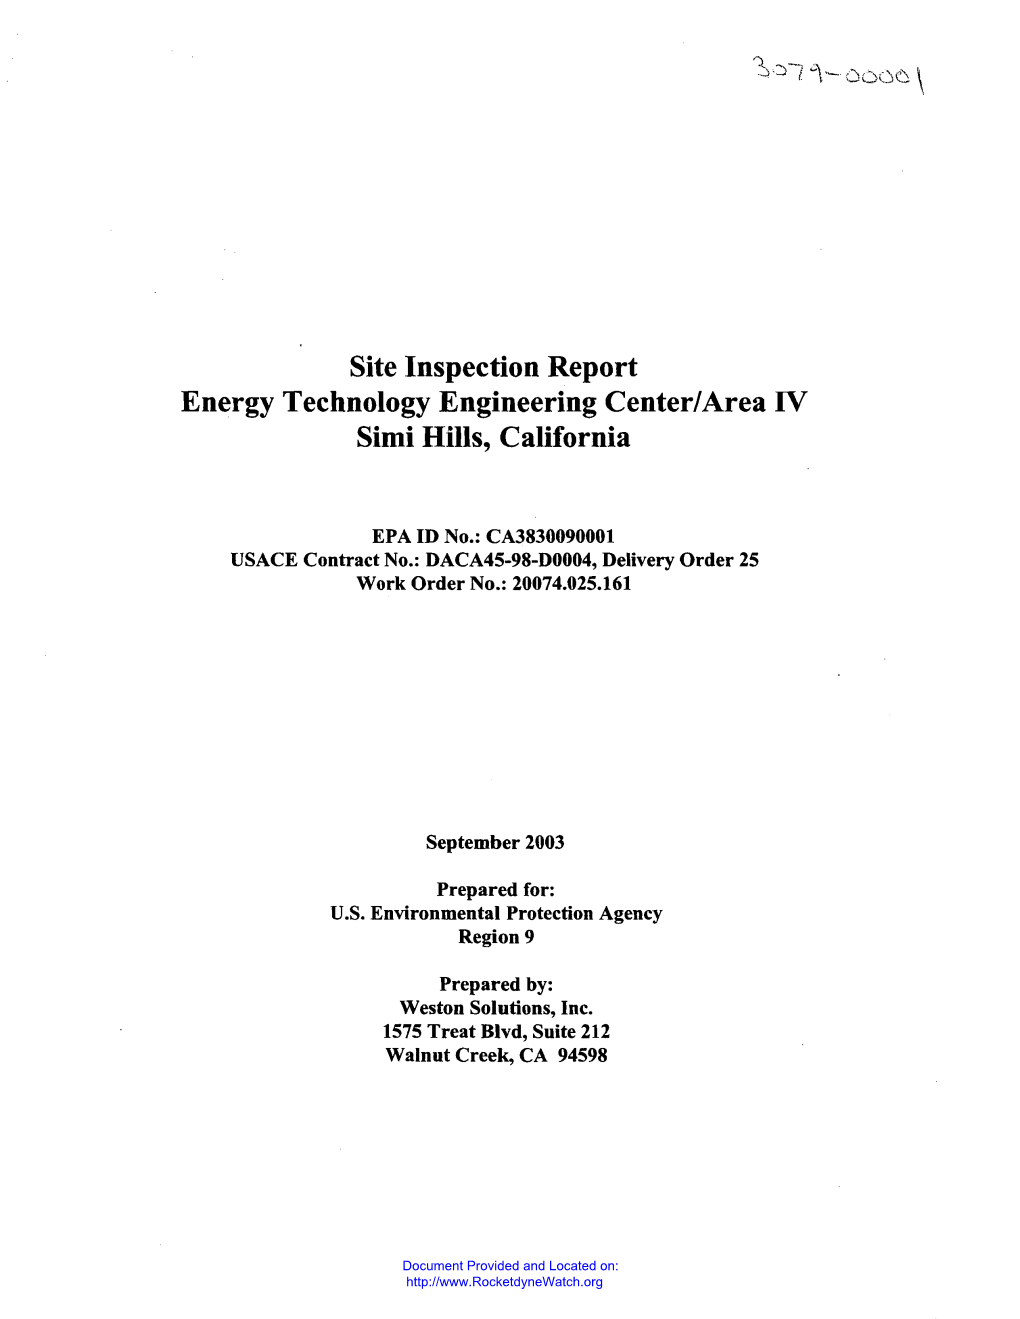 Site Inspection Report, Energy Technology Engineering